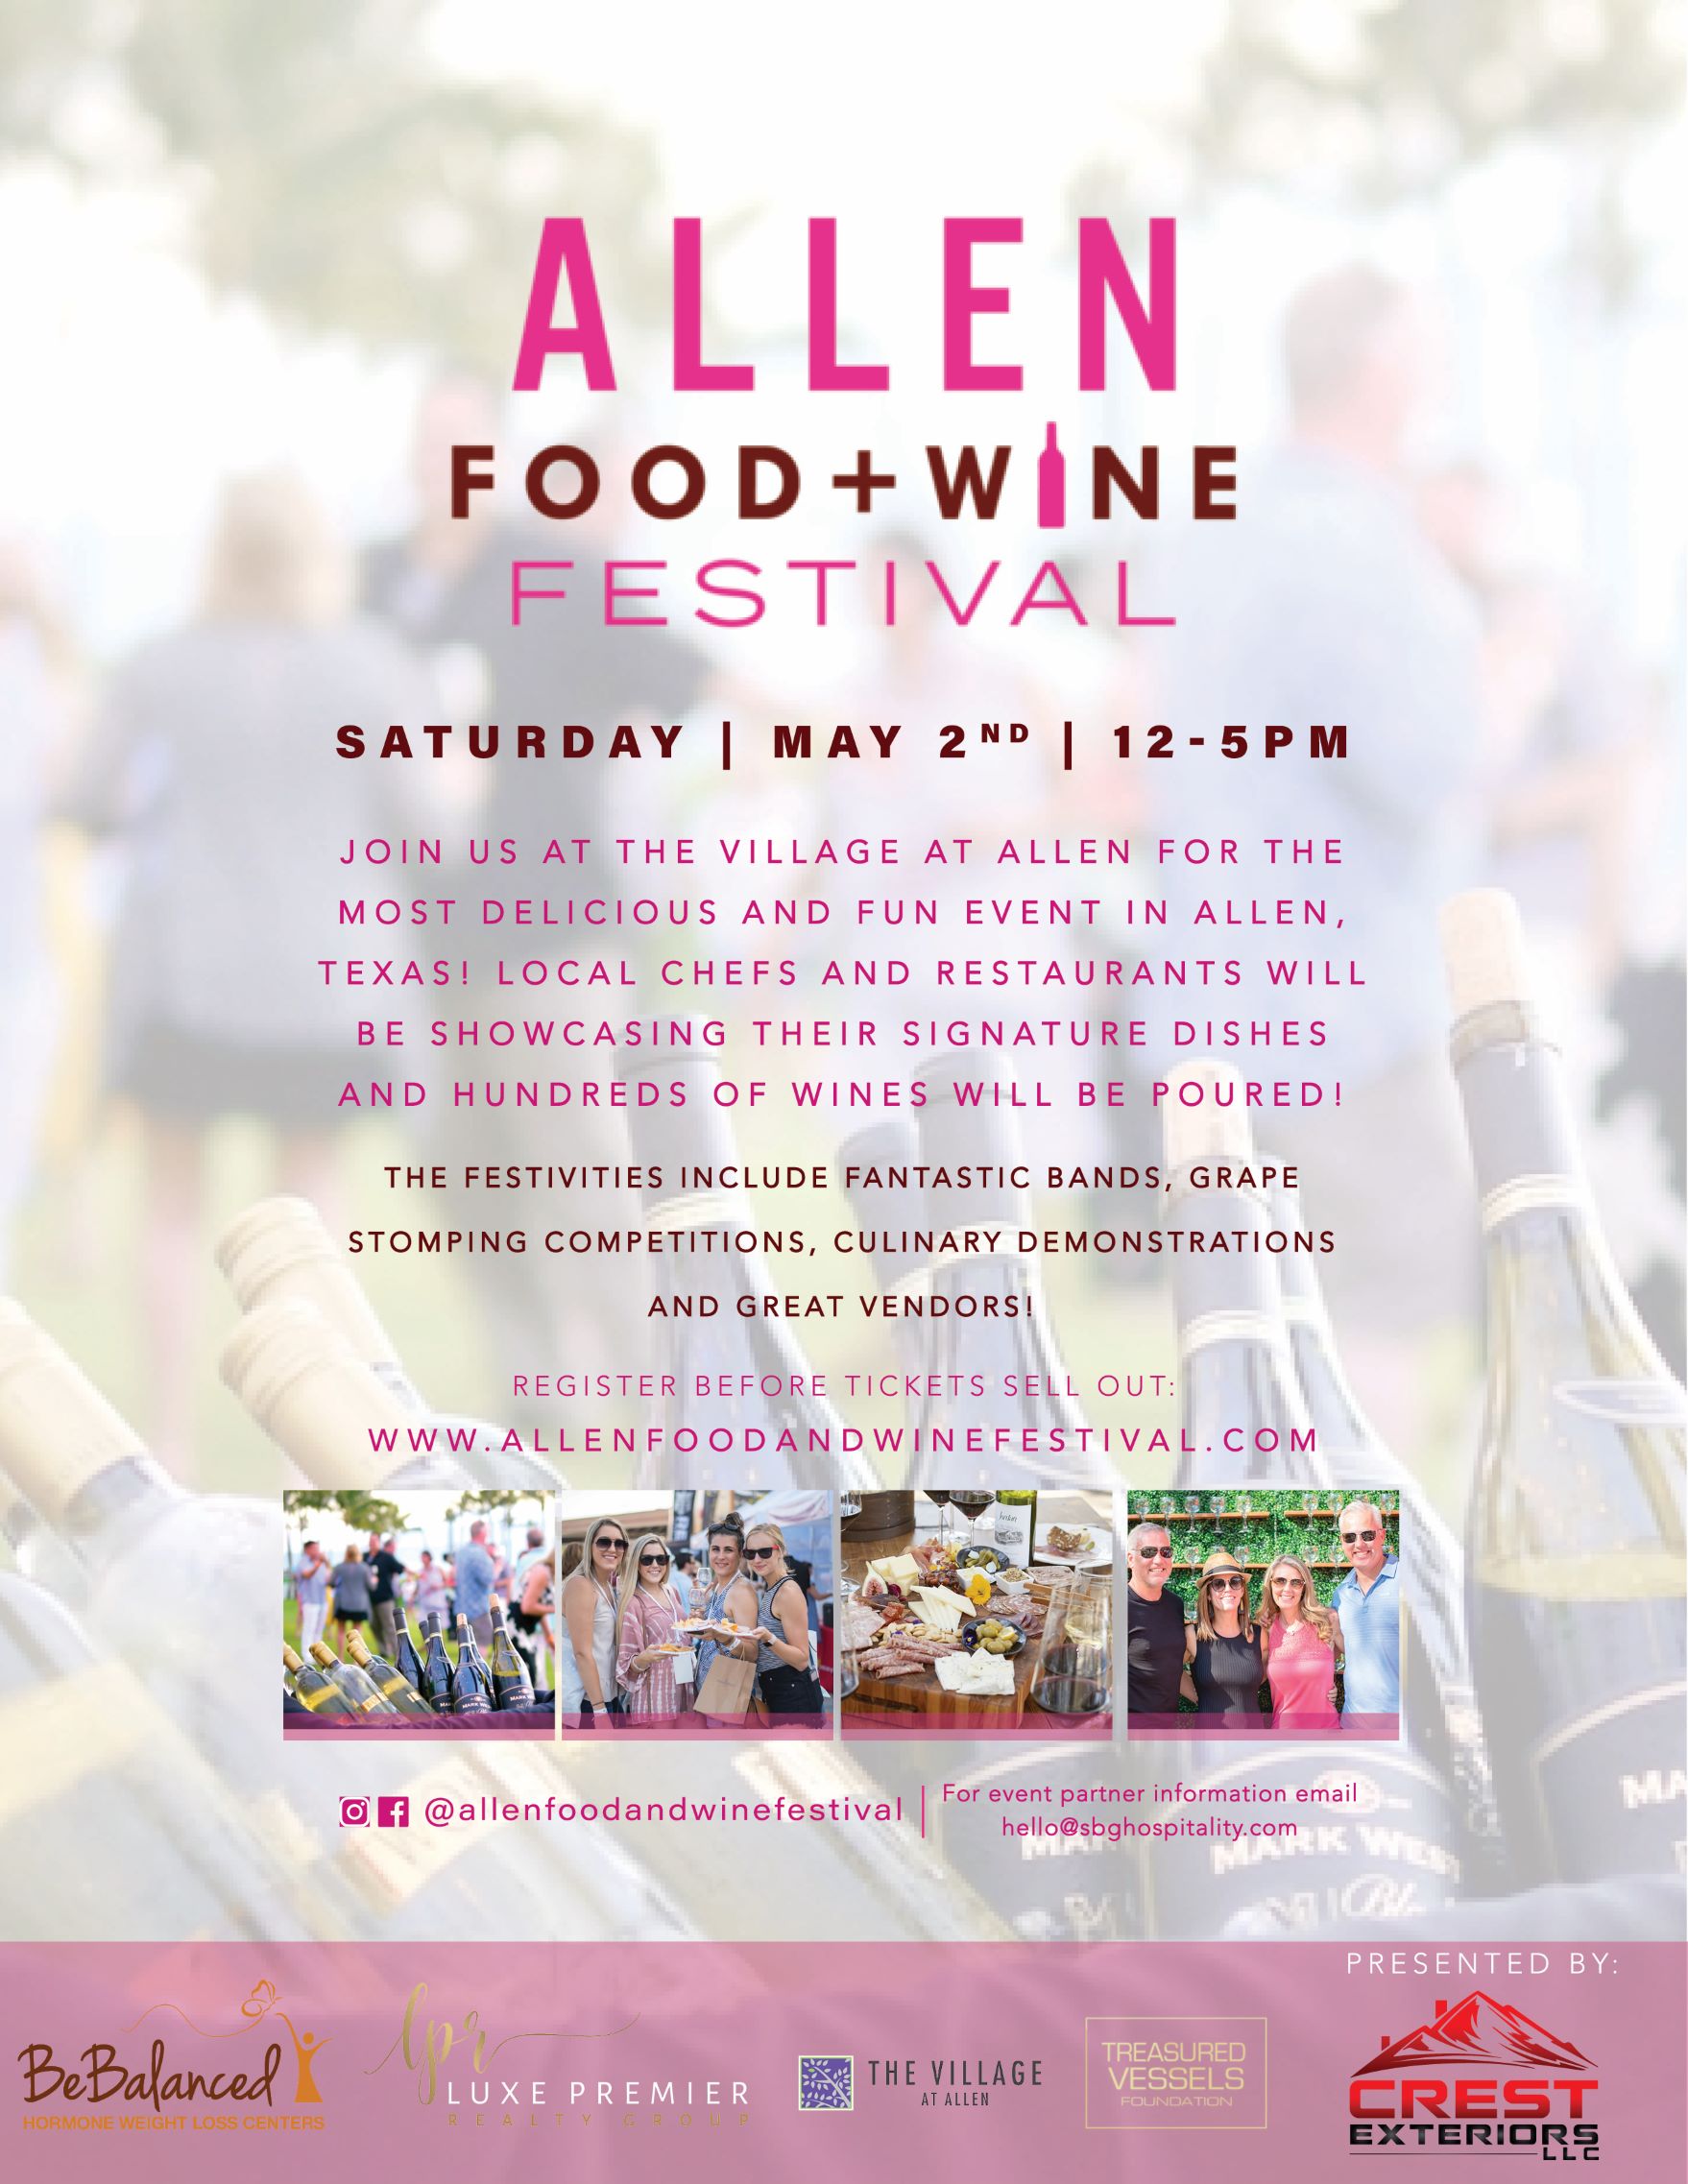 2nd Annual Allen Food + Wine Festival presented by Crest Exteriors